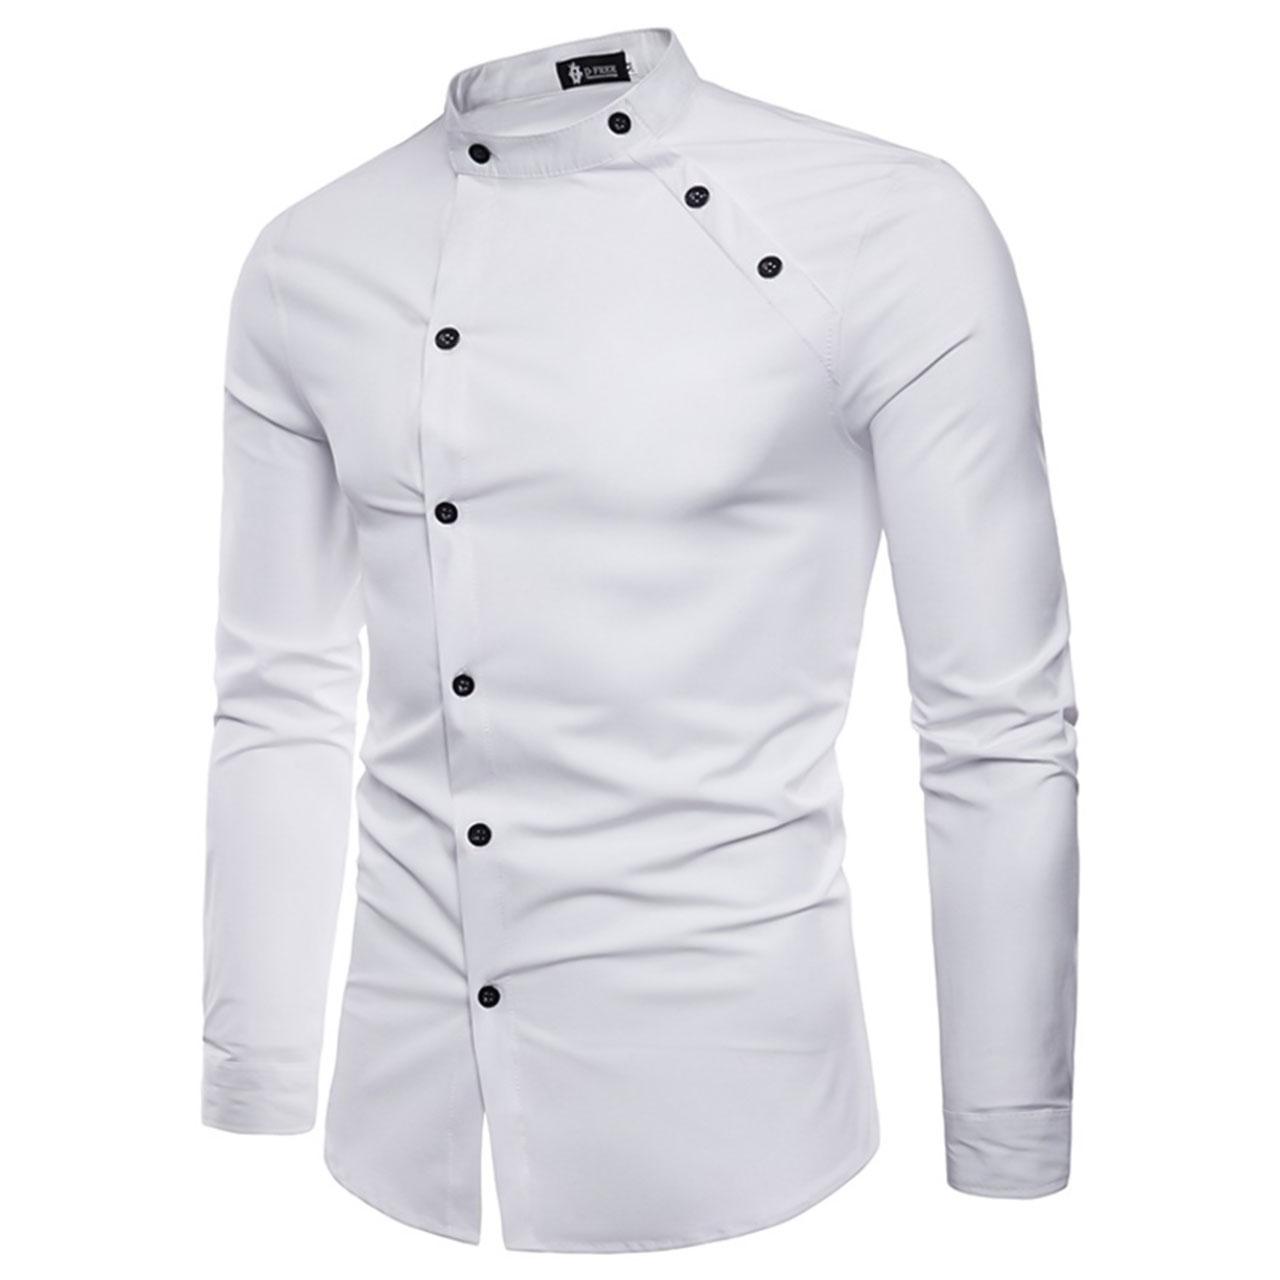 Men's Solid Cotton Daily White Long Sleeve Colored Shirts